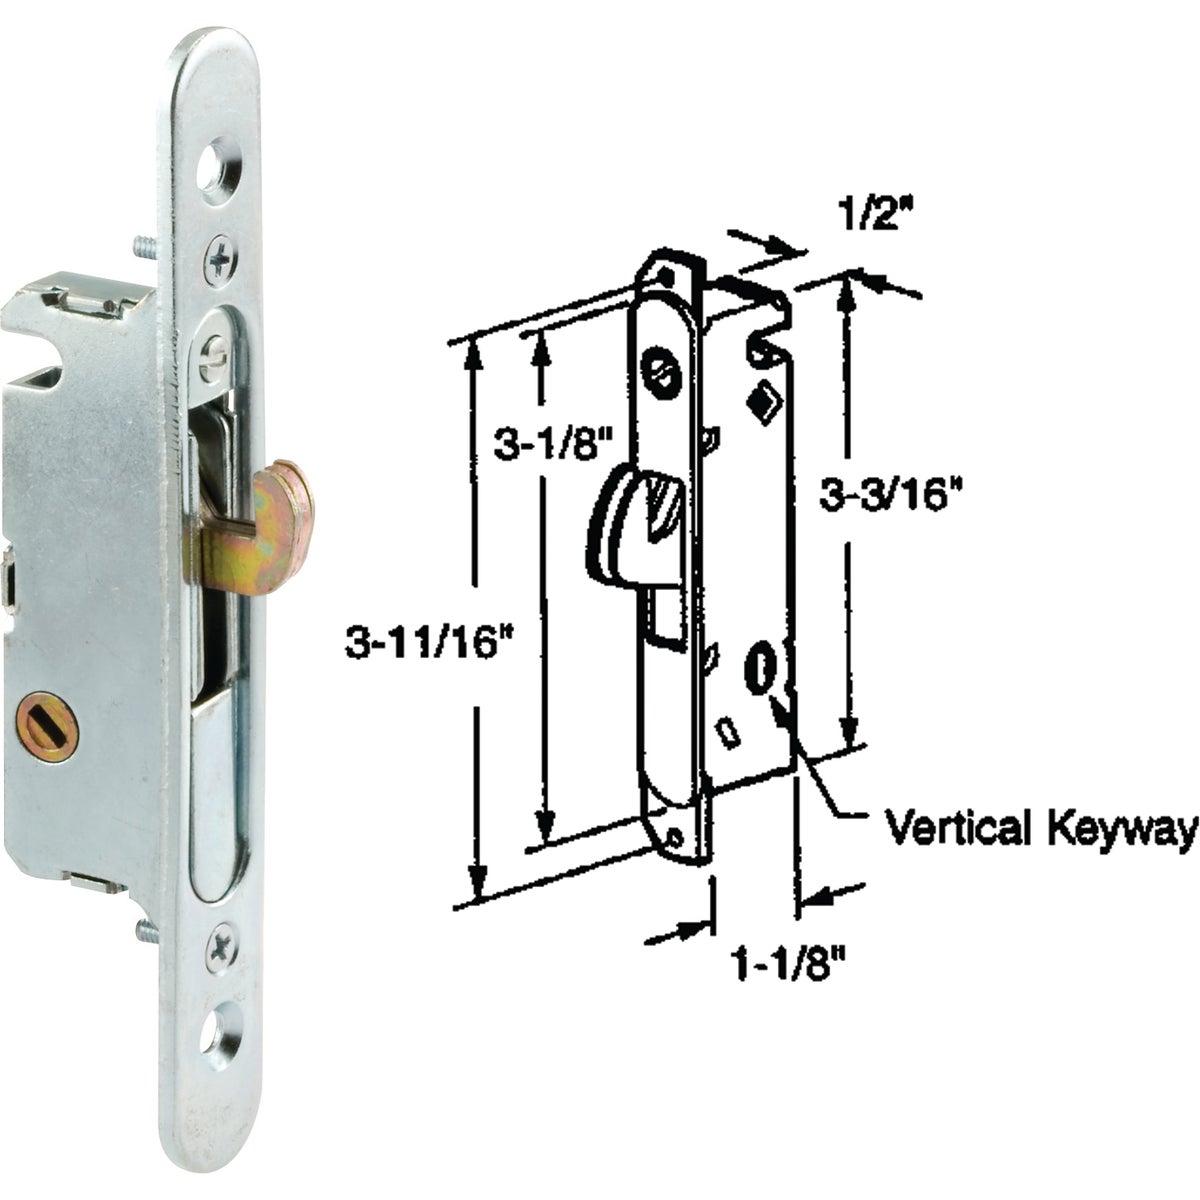 PRIME-LINE E 2164 Prime-Line Steel Mortise Patio Door Lock with Mounting Bracket E 2164